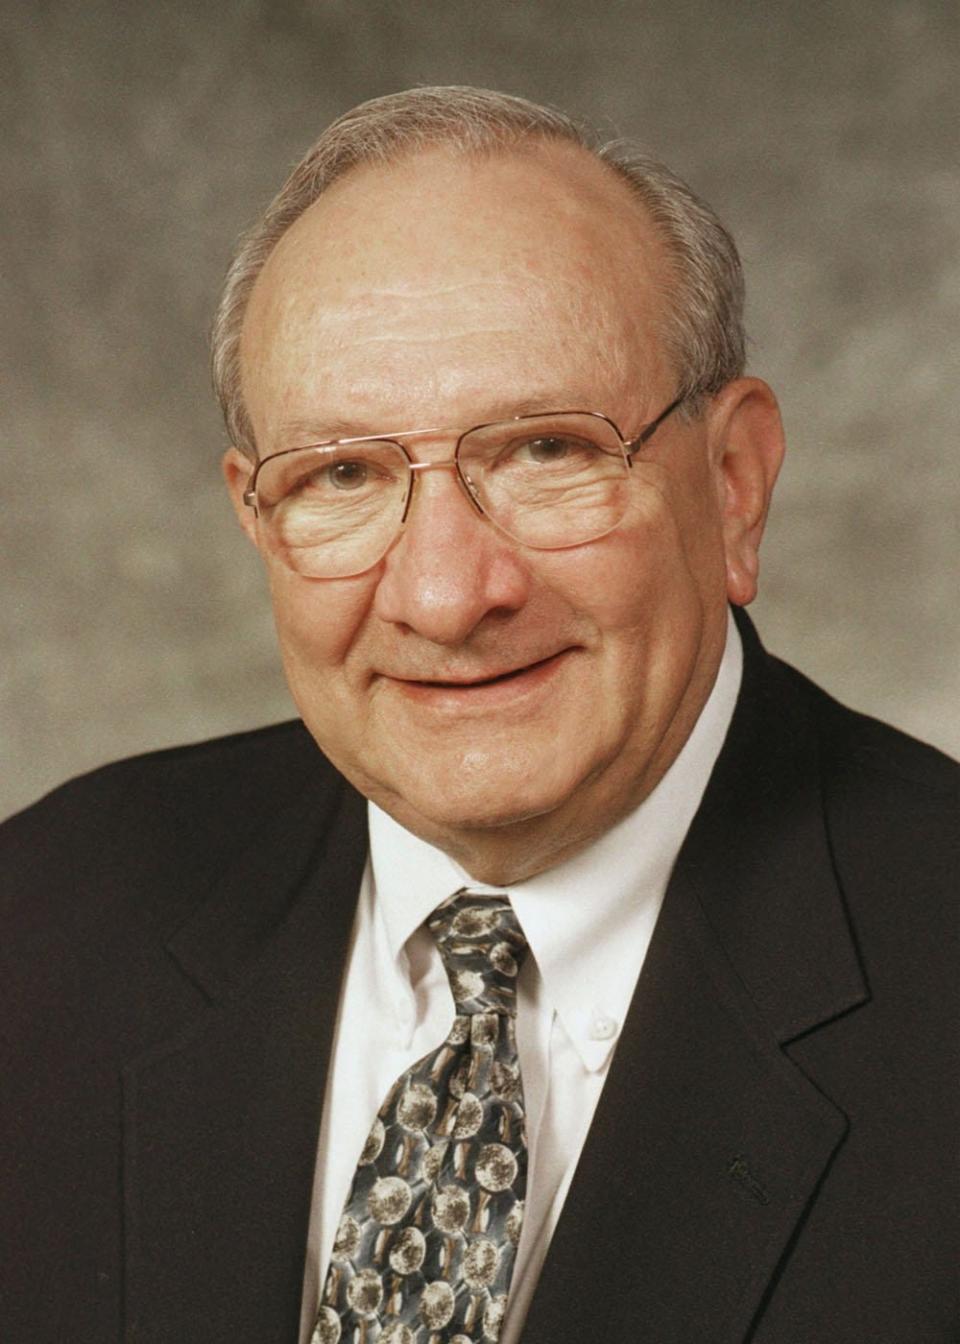 Michael Schwartz served as president of Kent State and Cleveland State.